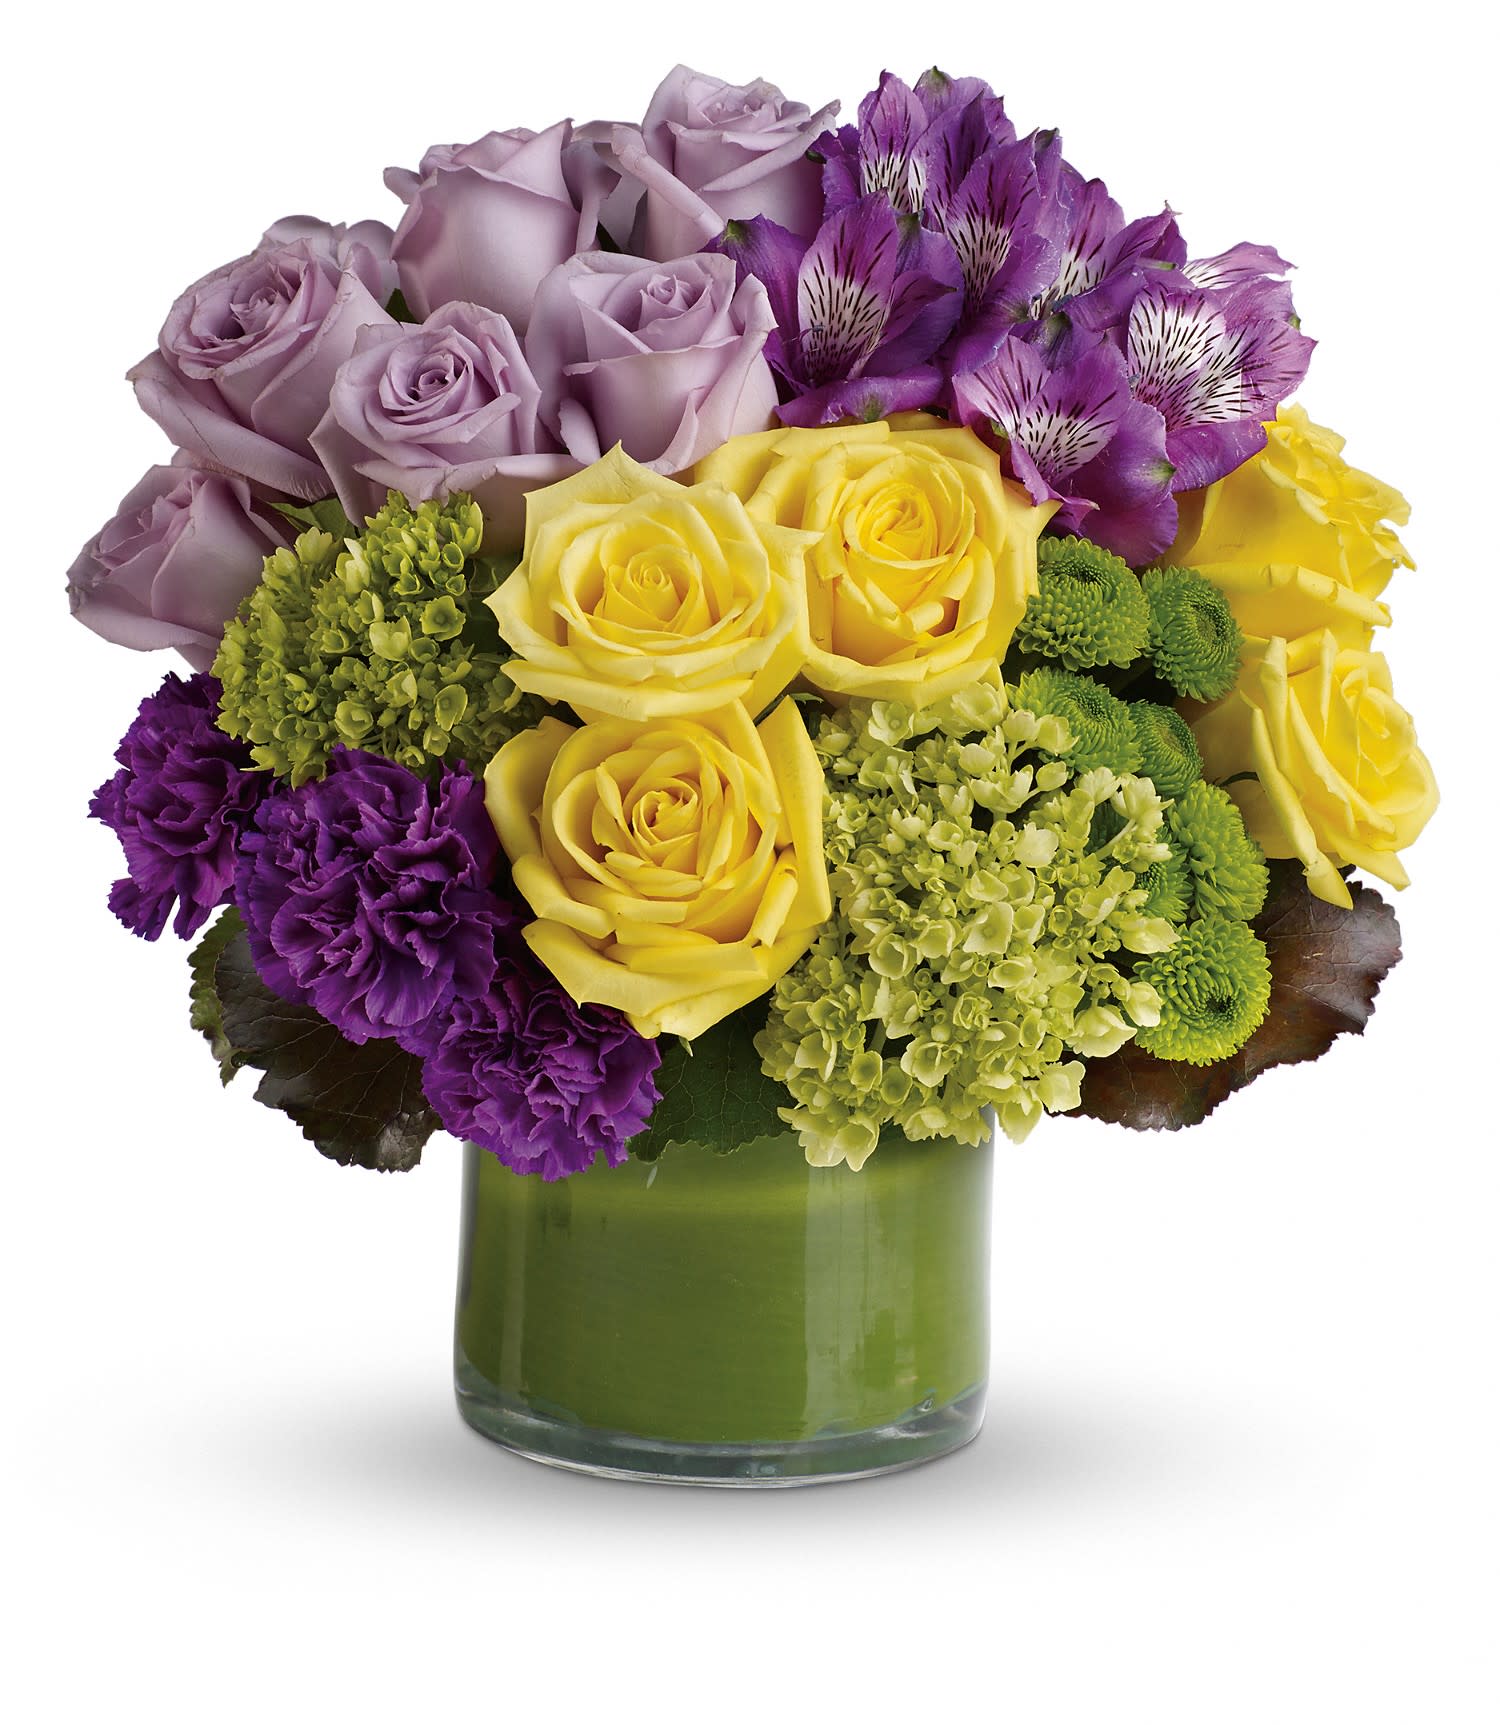 Simply Splendid - Make a floral fashion statement! Hand-delivered in a leaf-wrapped cylinder vase, this stylish bouquet is a sophisticated mix of roses, hydrangea and alstroemeria that's outstanding for any occasion.   This chic arrangement includes miniature green hydrangea, lavender and yellow roses, purple alstroemeria, dark purple carnations, green button spray chrysanthemums, galax leaves and a ti leaf. Delivered in a clear glass vase. Approximately 12&quot; W x 12 1/2&quot; H 